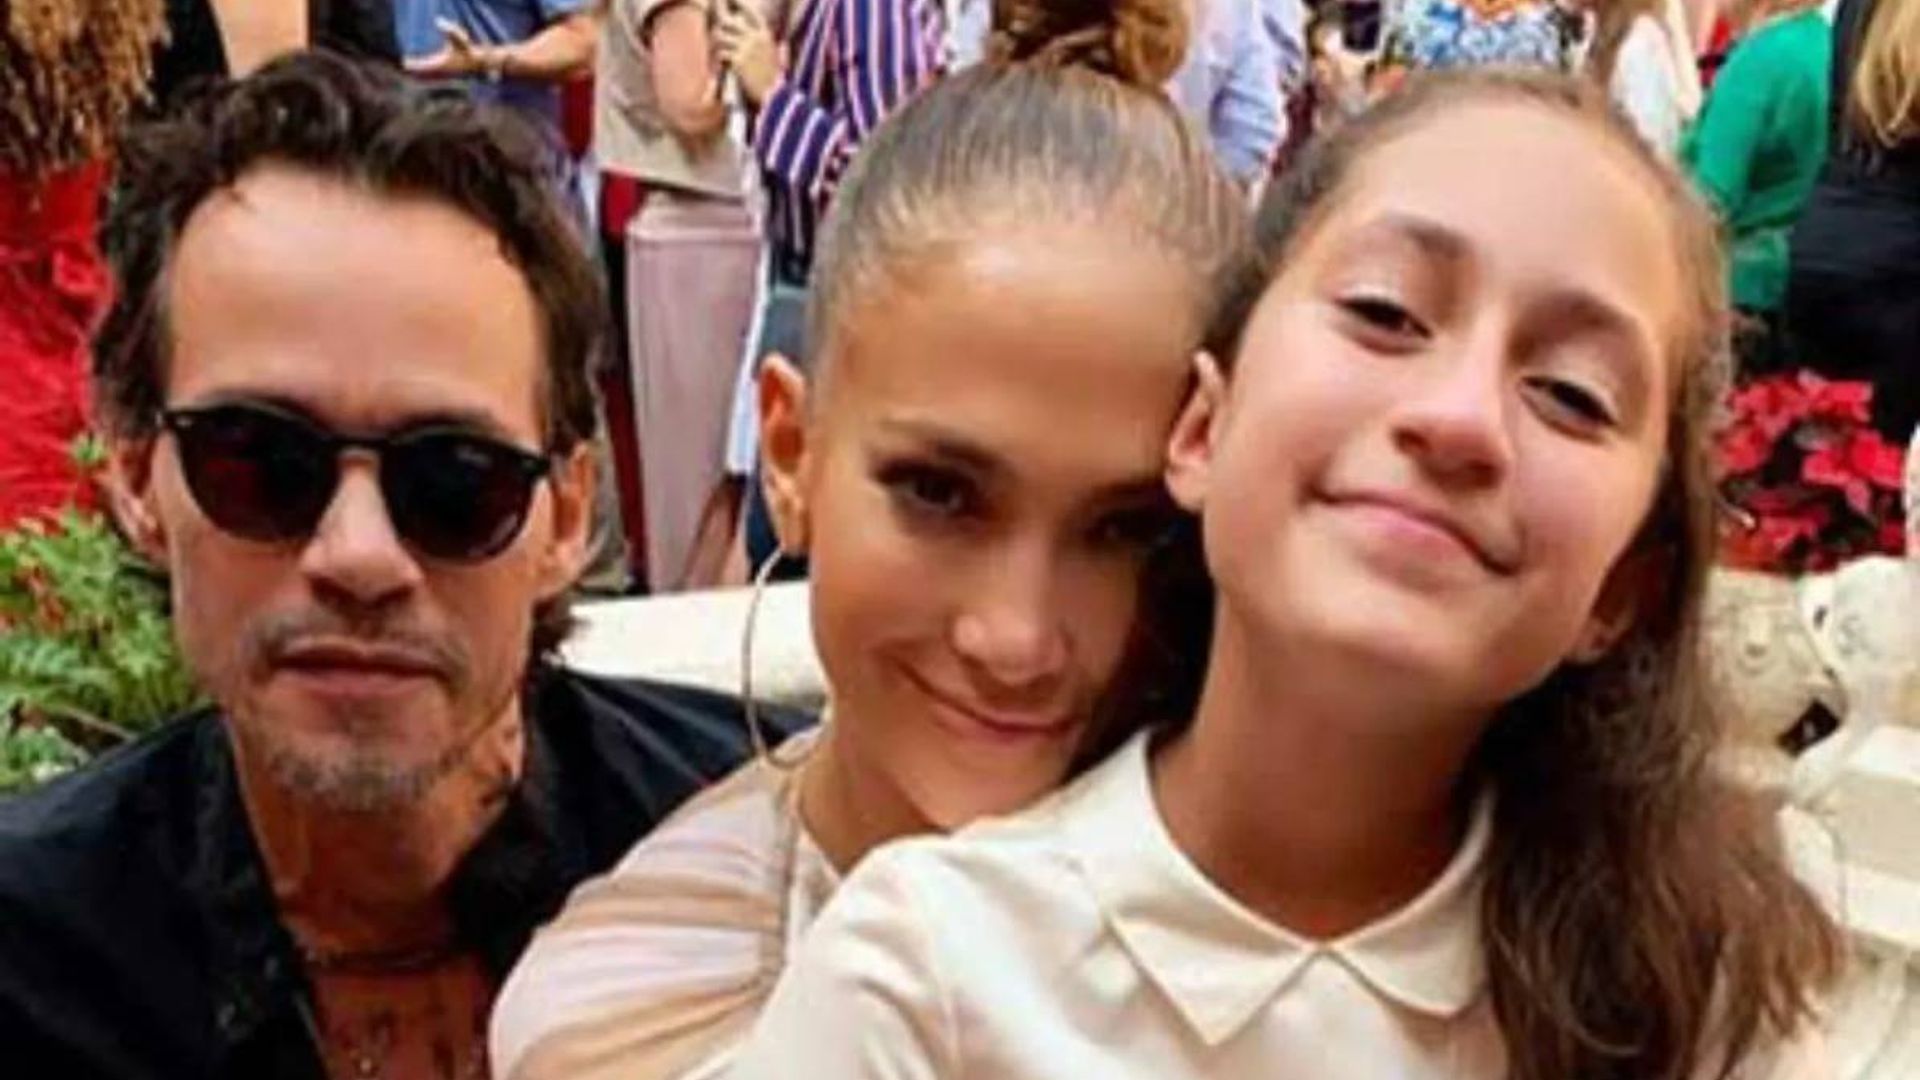 Marc Anthony updates fans with celebratory news as ex Jennifer Lopez takes daughter to dinner with Ben Affleck